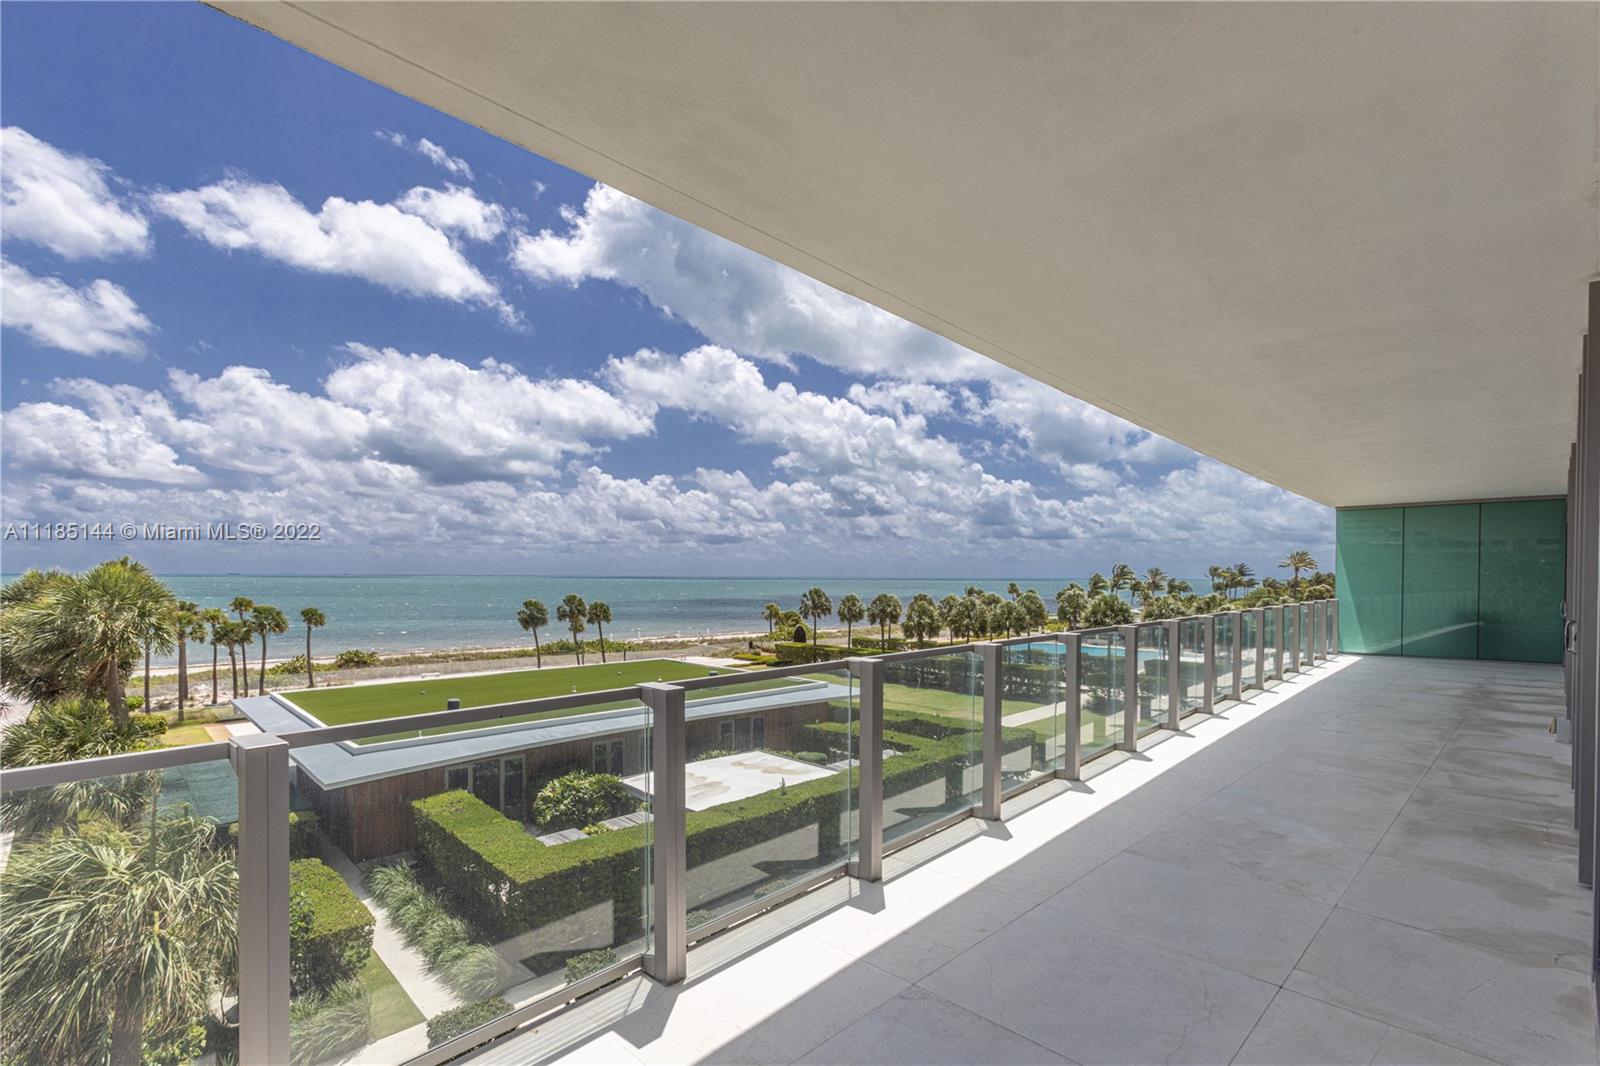 Amazing North corner unit in Miami's most prestigious building, Oceana Key Biscayne. Hallucinating open views to Atlantic Ocean, Miami Beach, Fisher Island, Key Biscayne. This wonderful property w/ 4,080 sqft has 3 beds, a service room, 6 baths, large laundry room and a huge wrap around balcony with 2,070 sqf. White Quartz countertops, Master Chef double oven, whole bean coffee system, wine cooler. Unique residence lobby, infinity pool, fitness center and top of the line spa, Tennis court, volleyball & more.